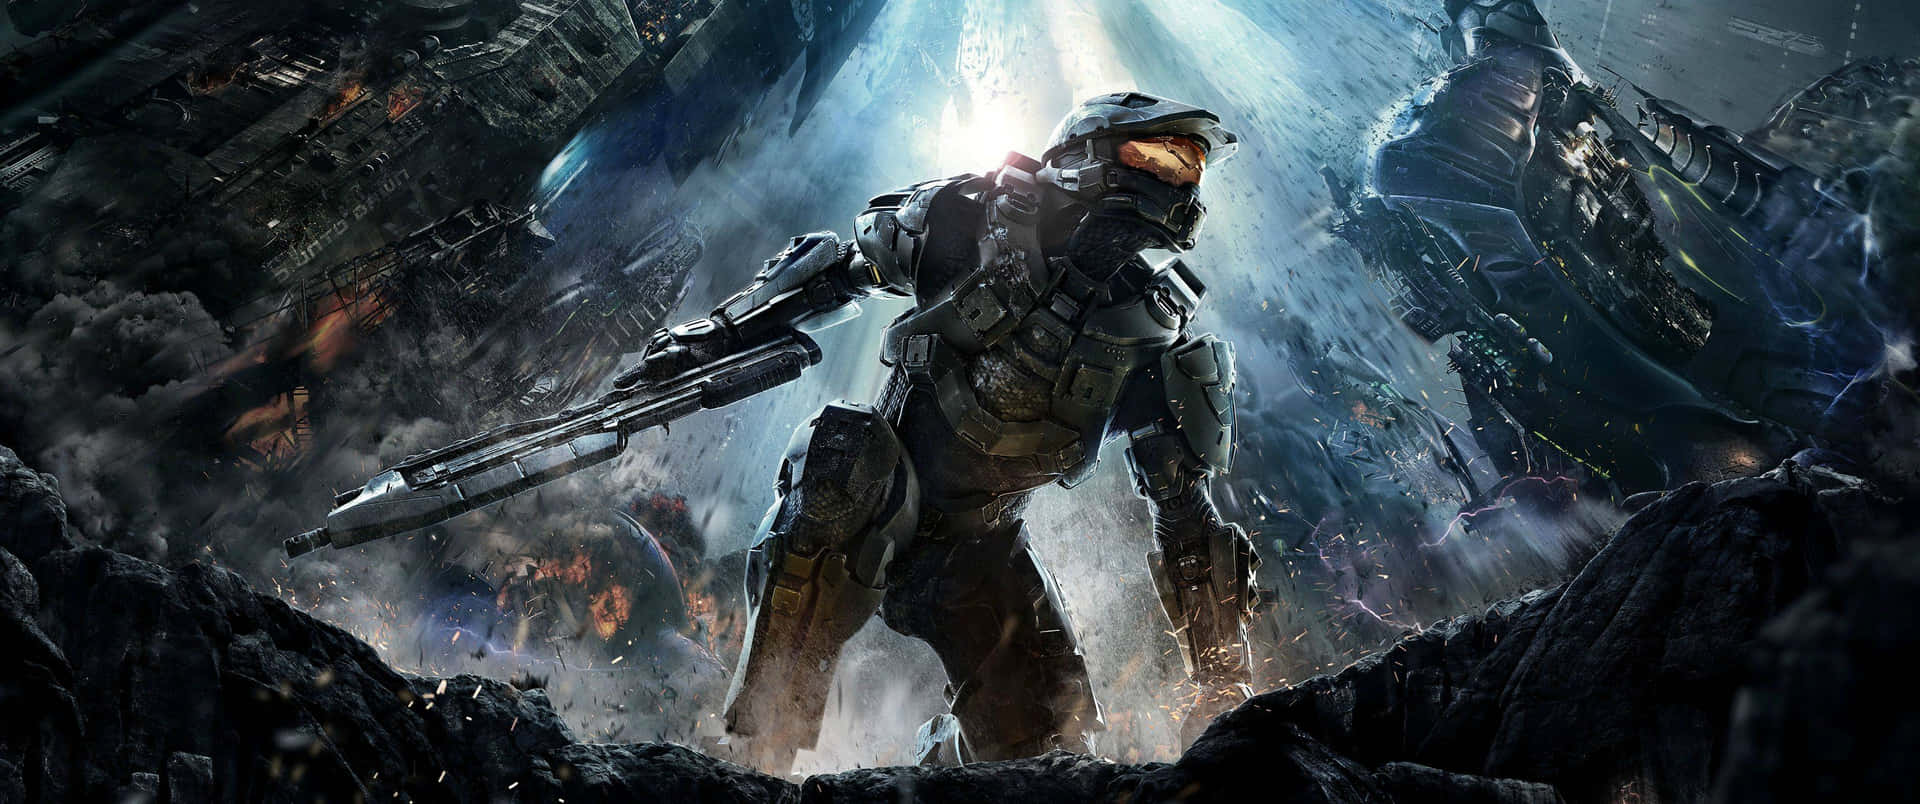 3440x1440p Halo 4 Game Background